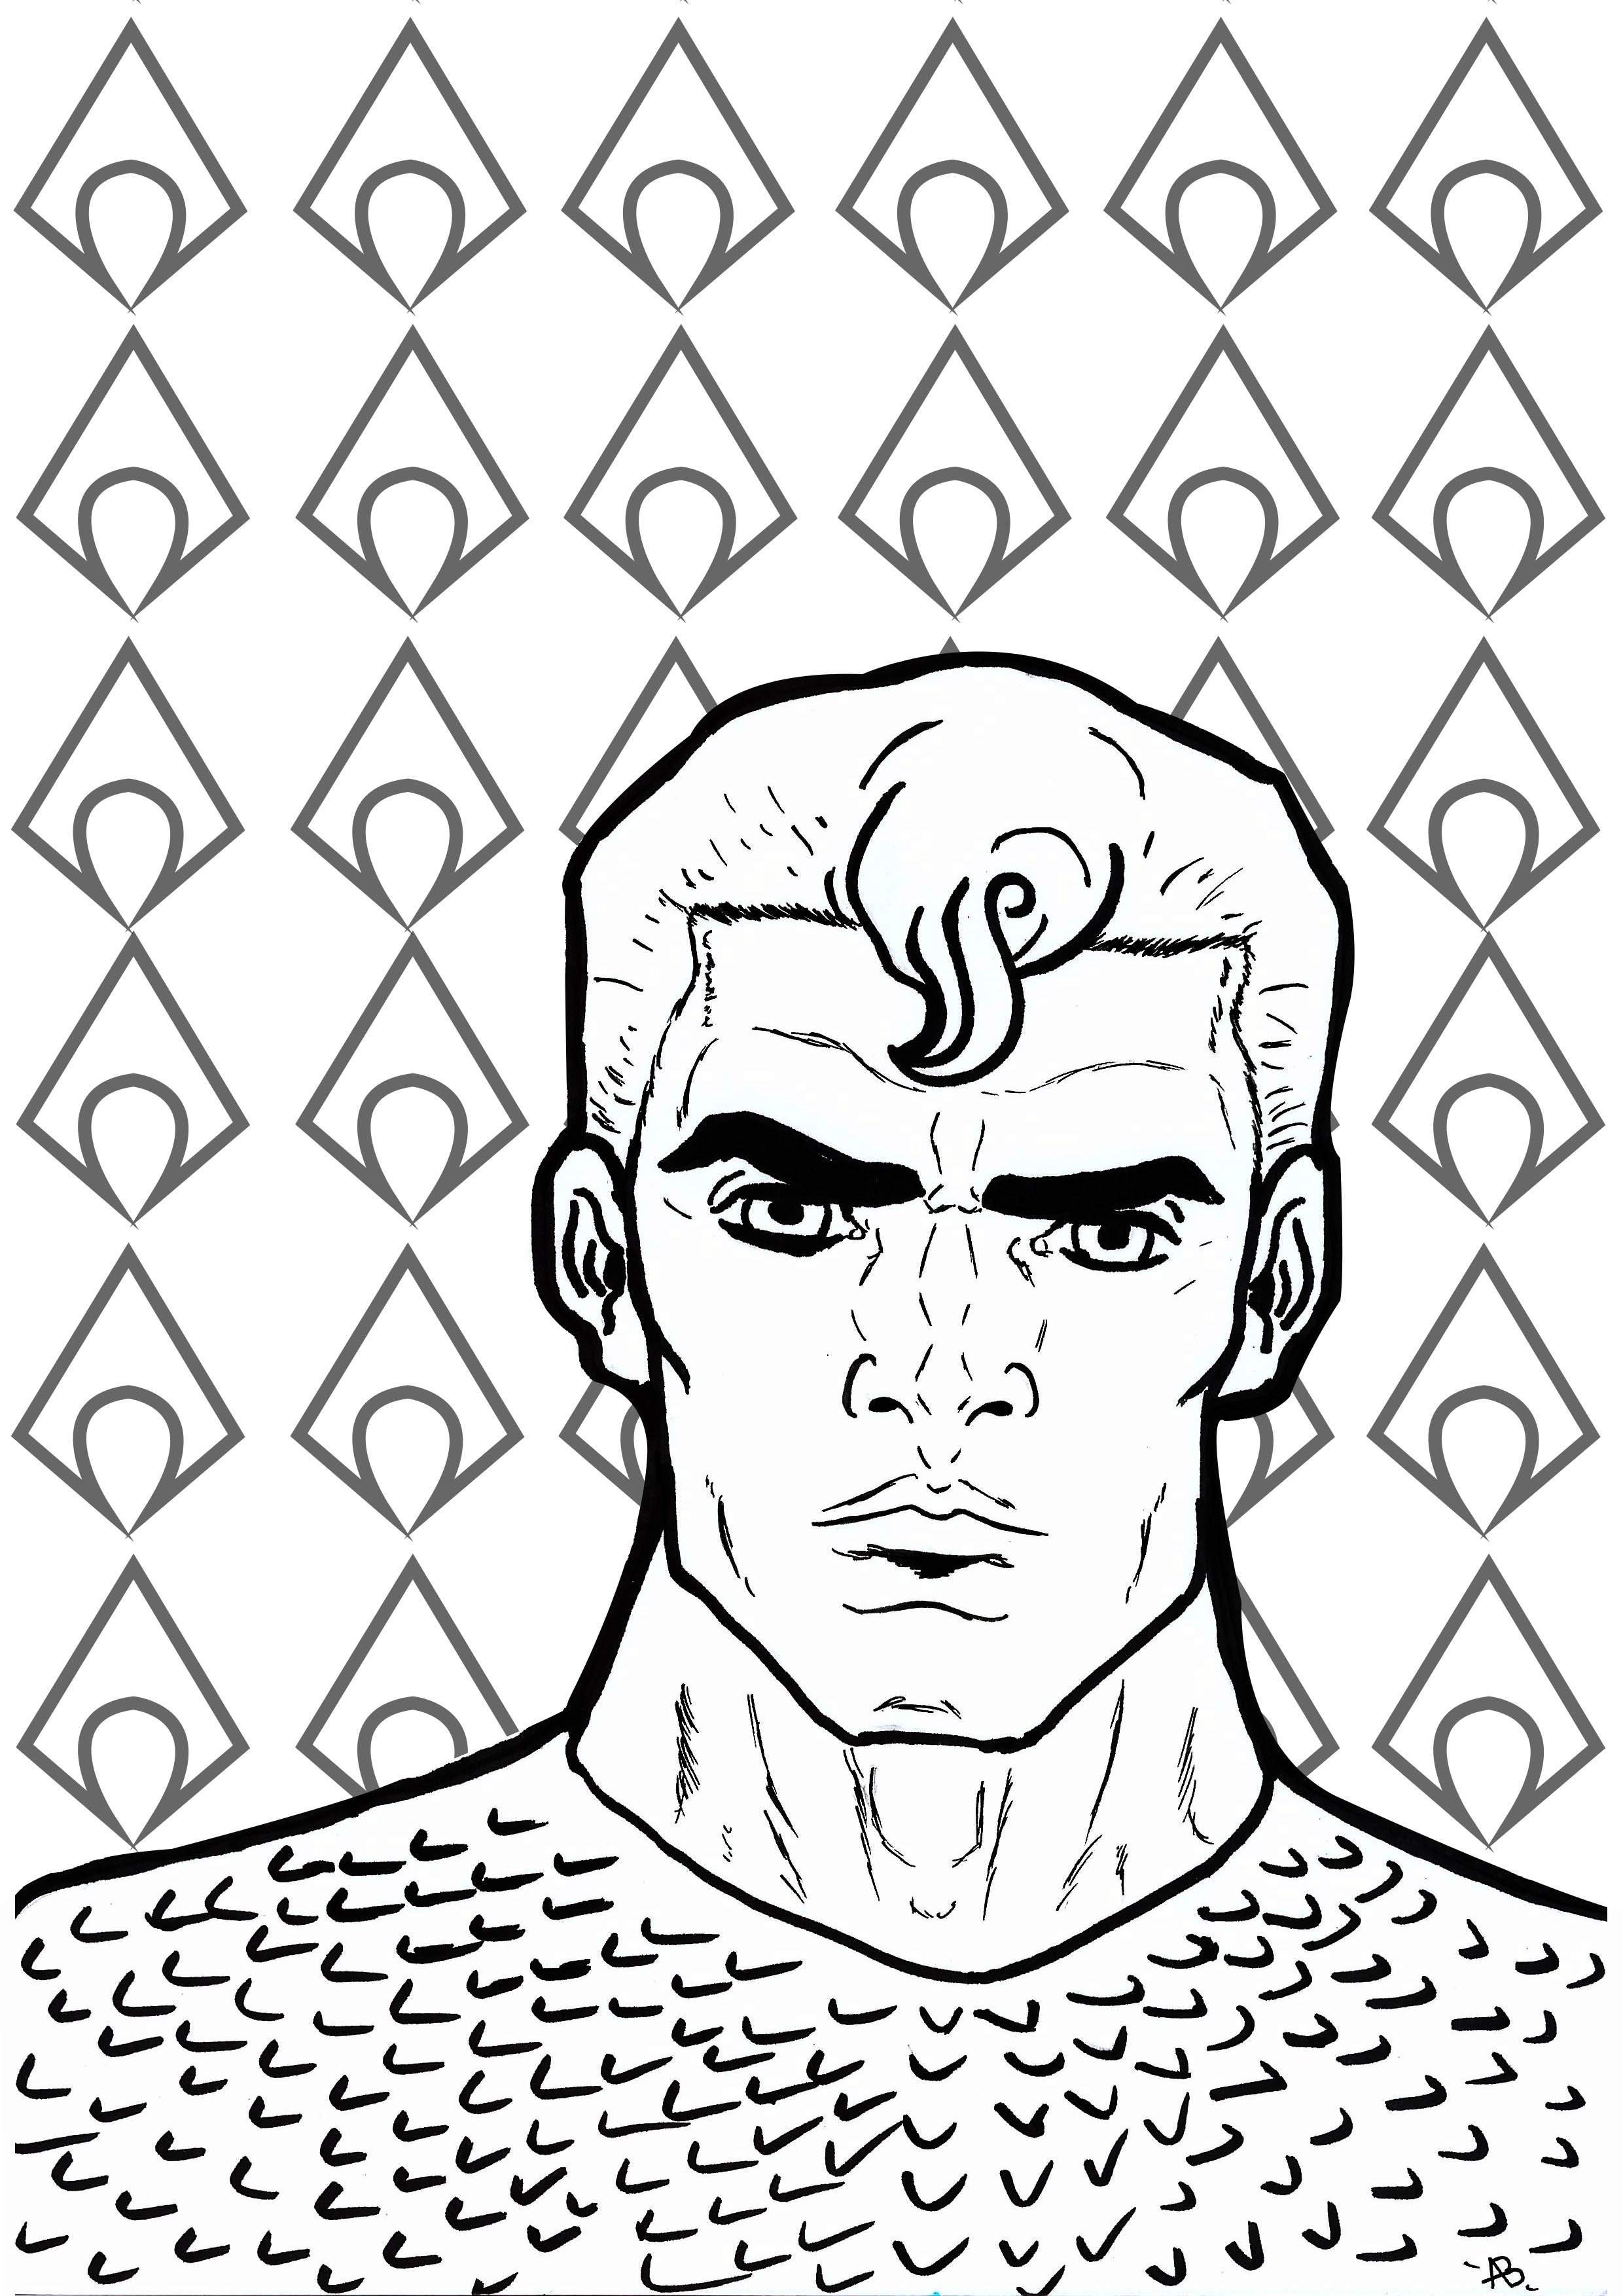 Coloring page inspired by Aquaman (DC Comics character), Artist : Allan